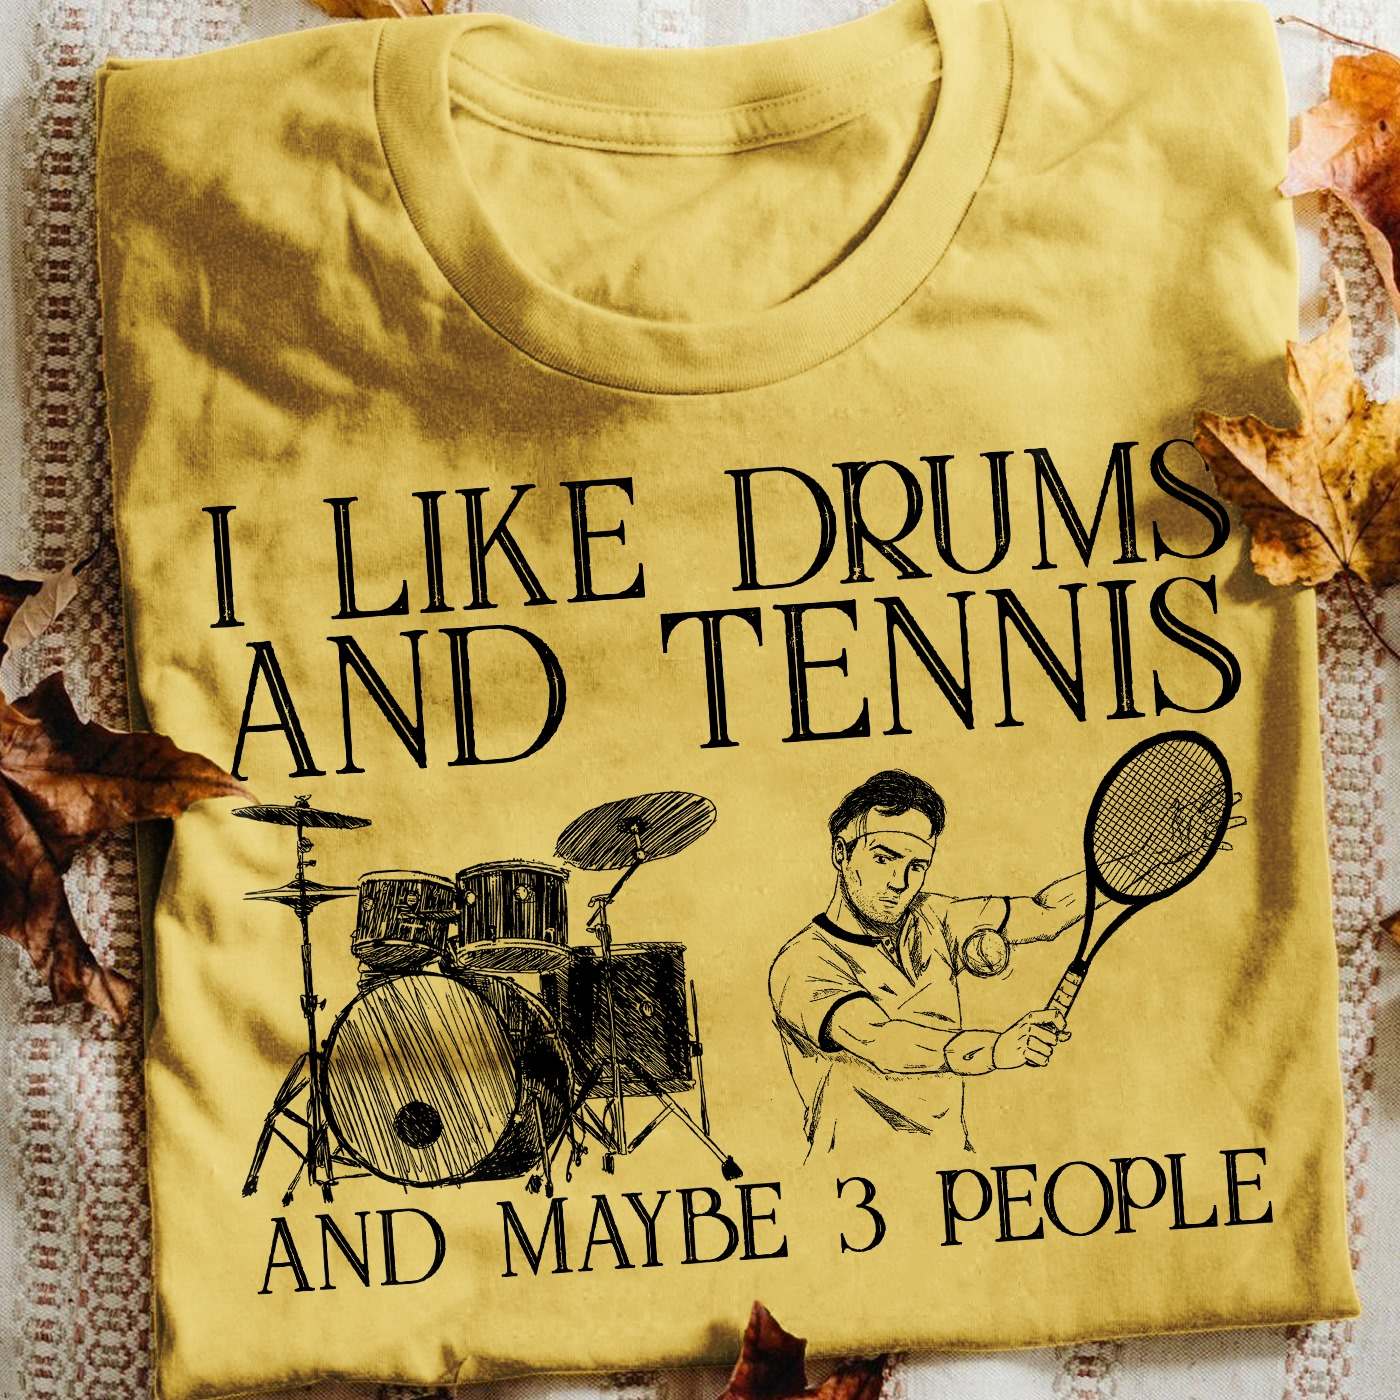 I like drums and tennis and maybe 3 people - Man playing tennis